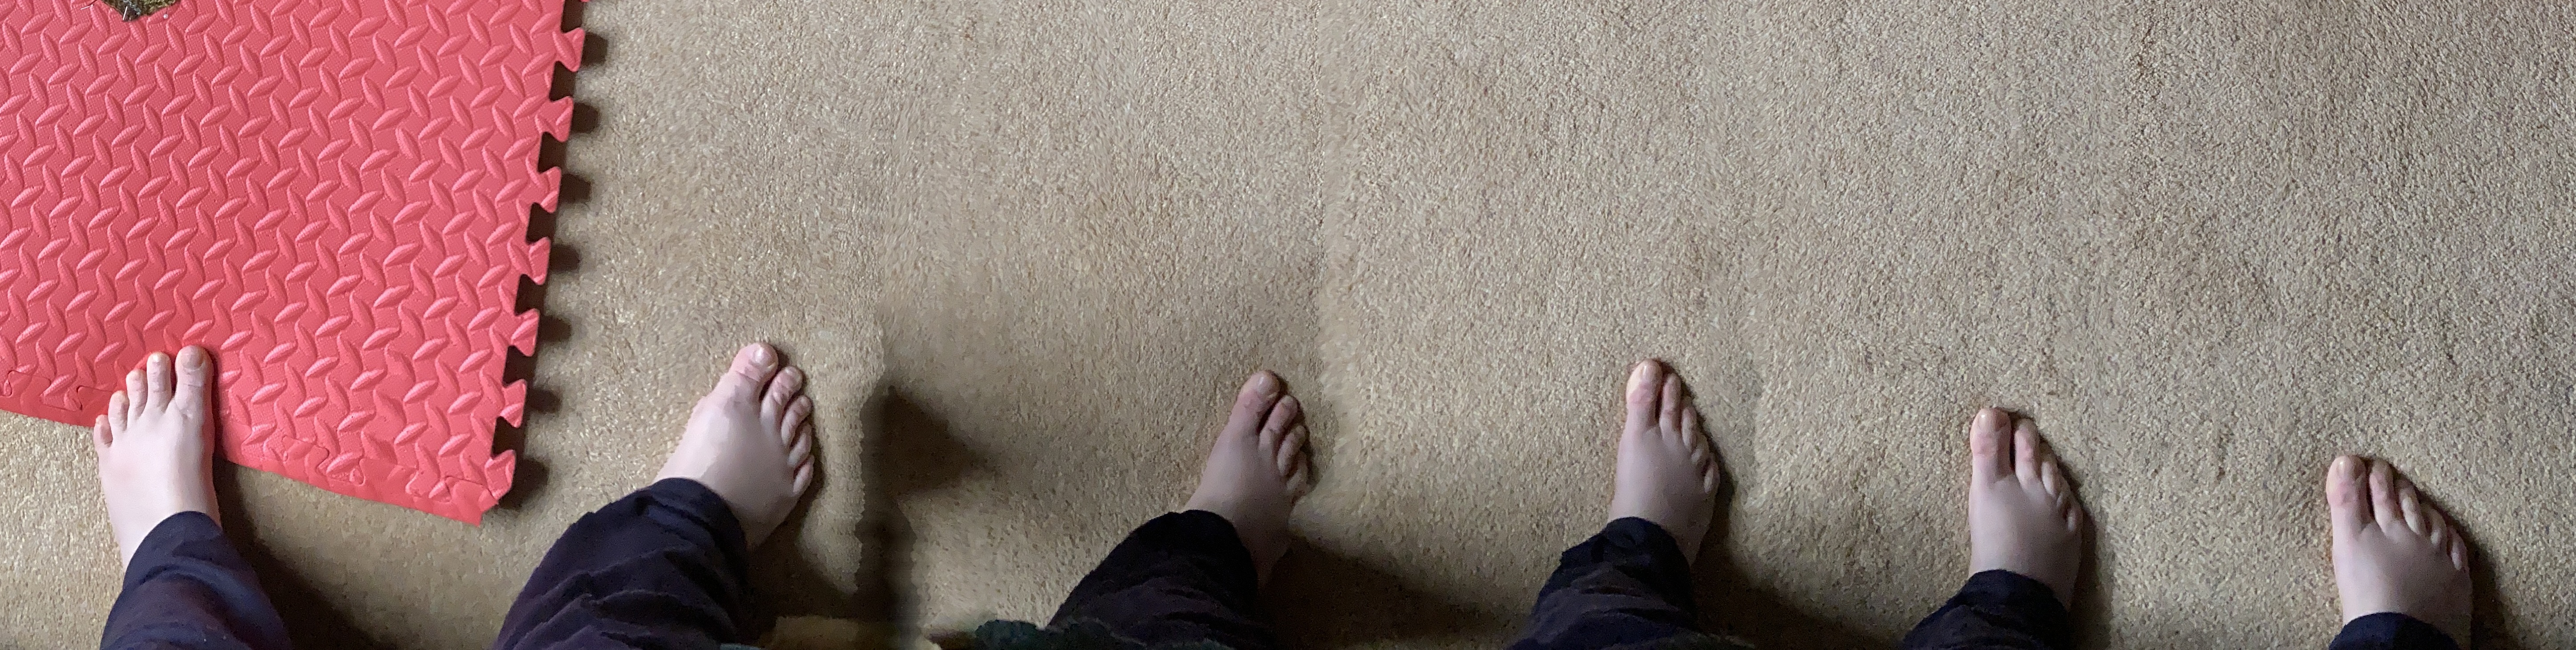 A panoramic photo showing one left foot and five right feet on a pale gold carpet. The left foot is just touching a red foam mat.